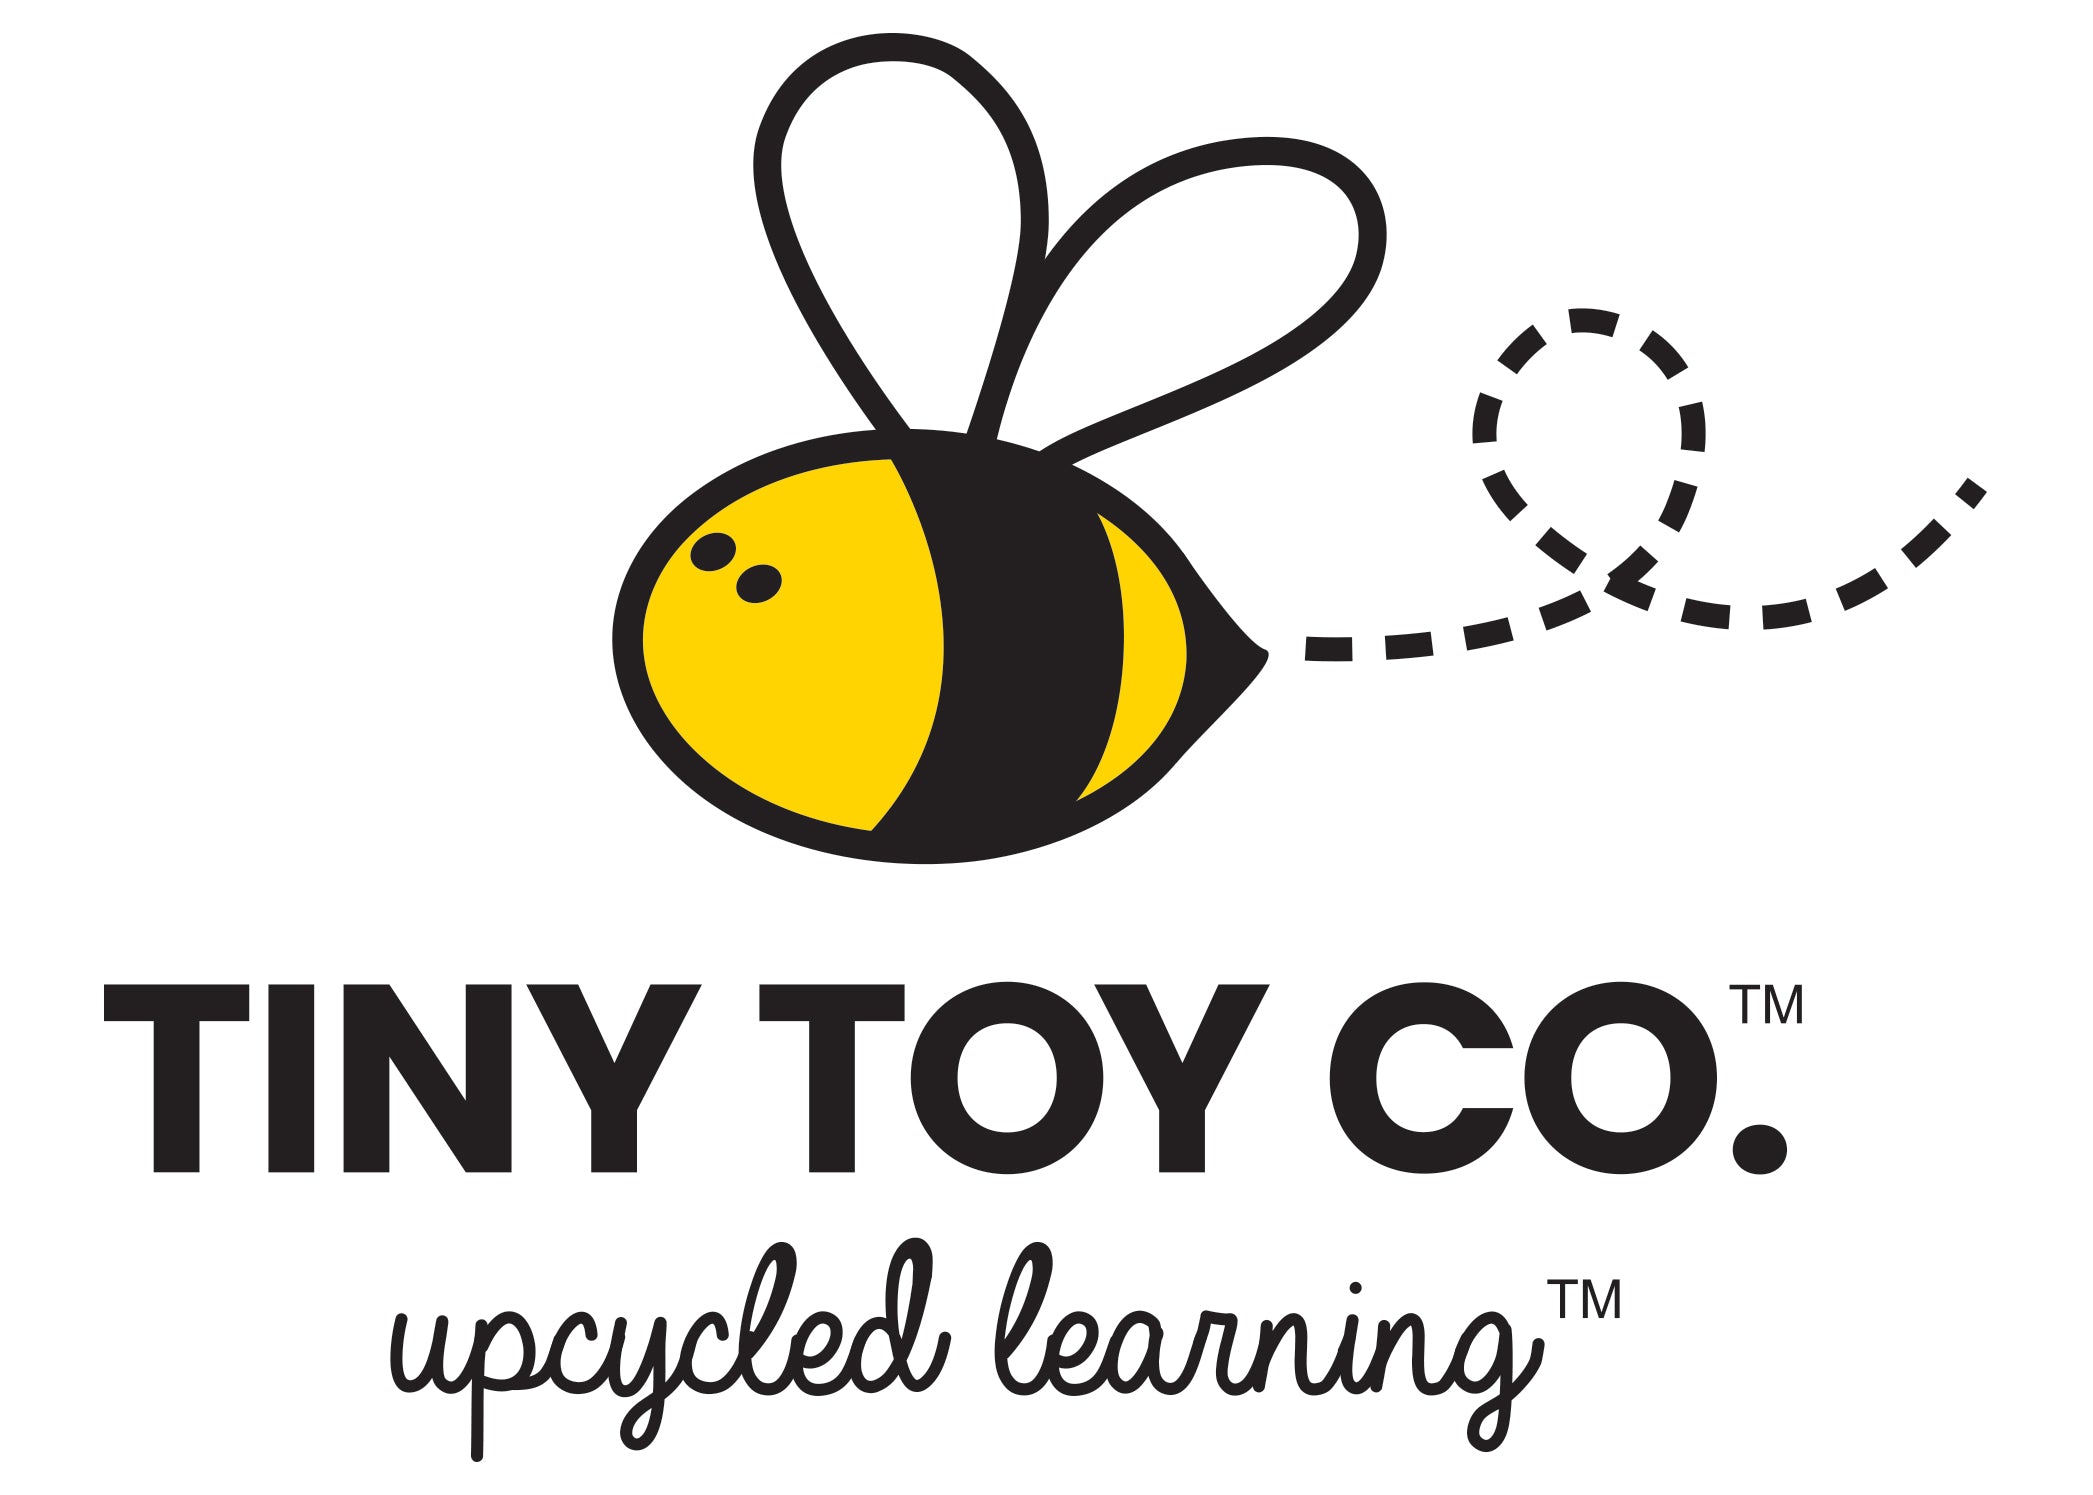 toy & co